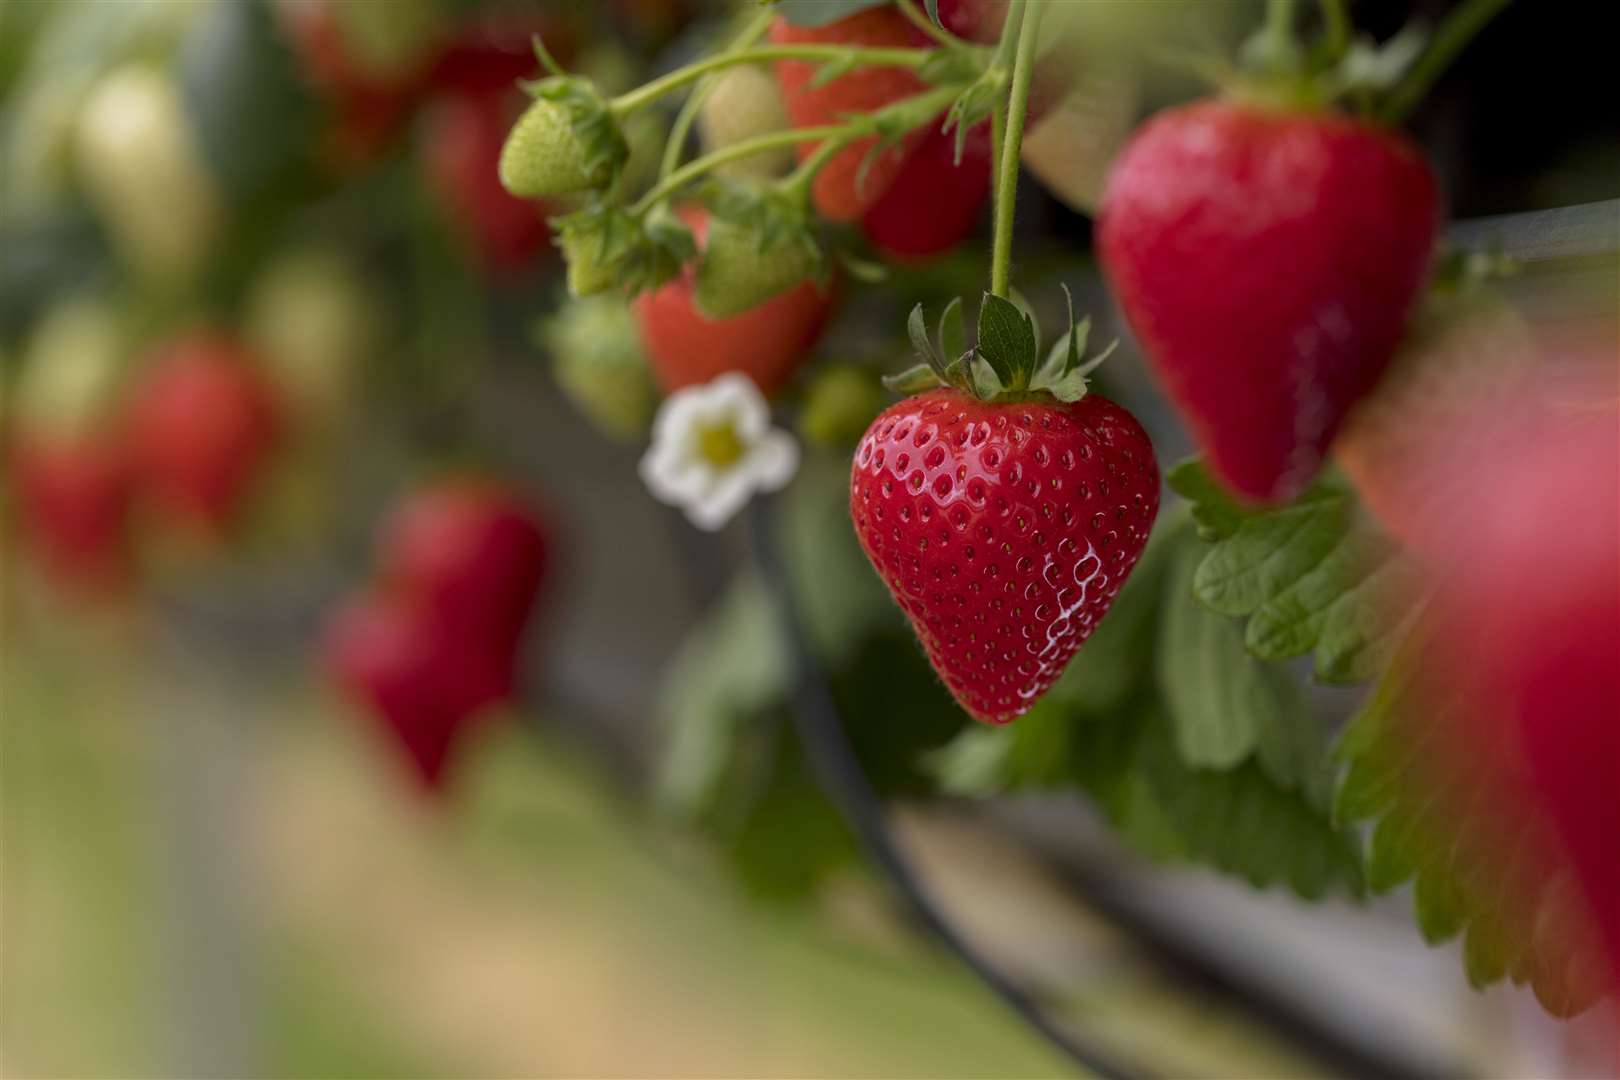 Strawberry season is here and hitting the shelves